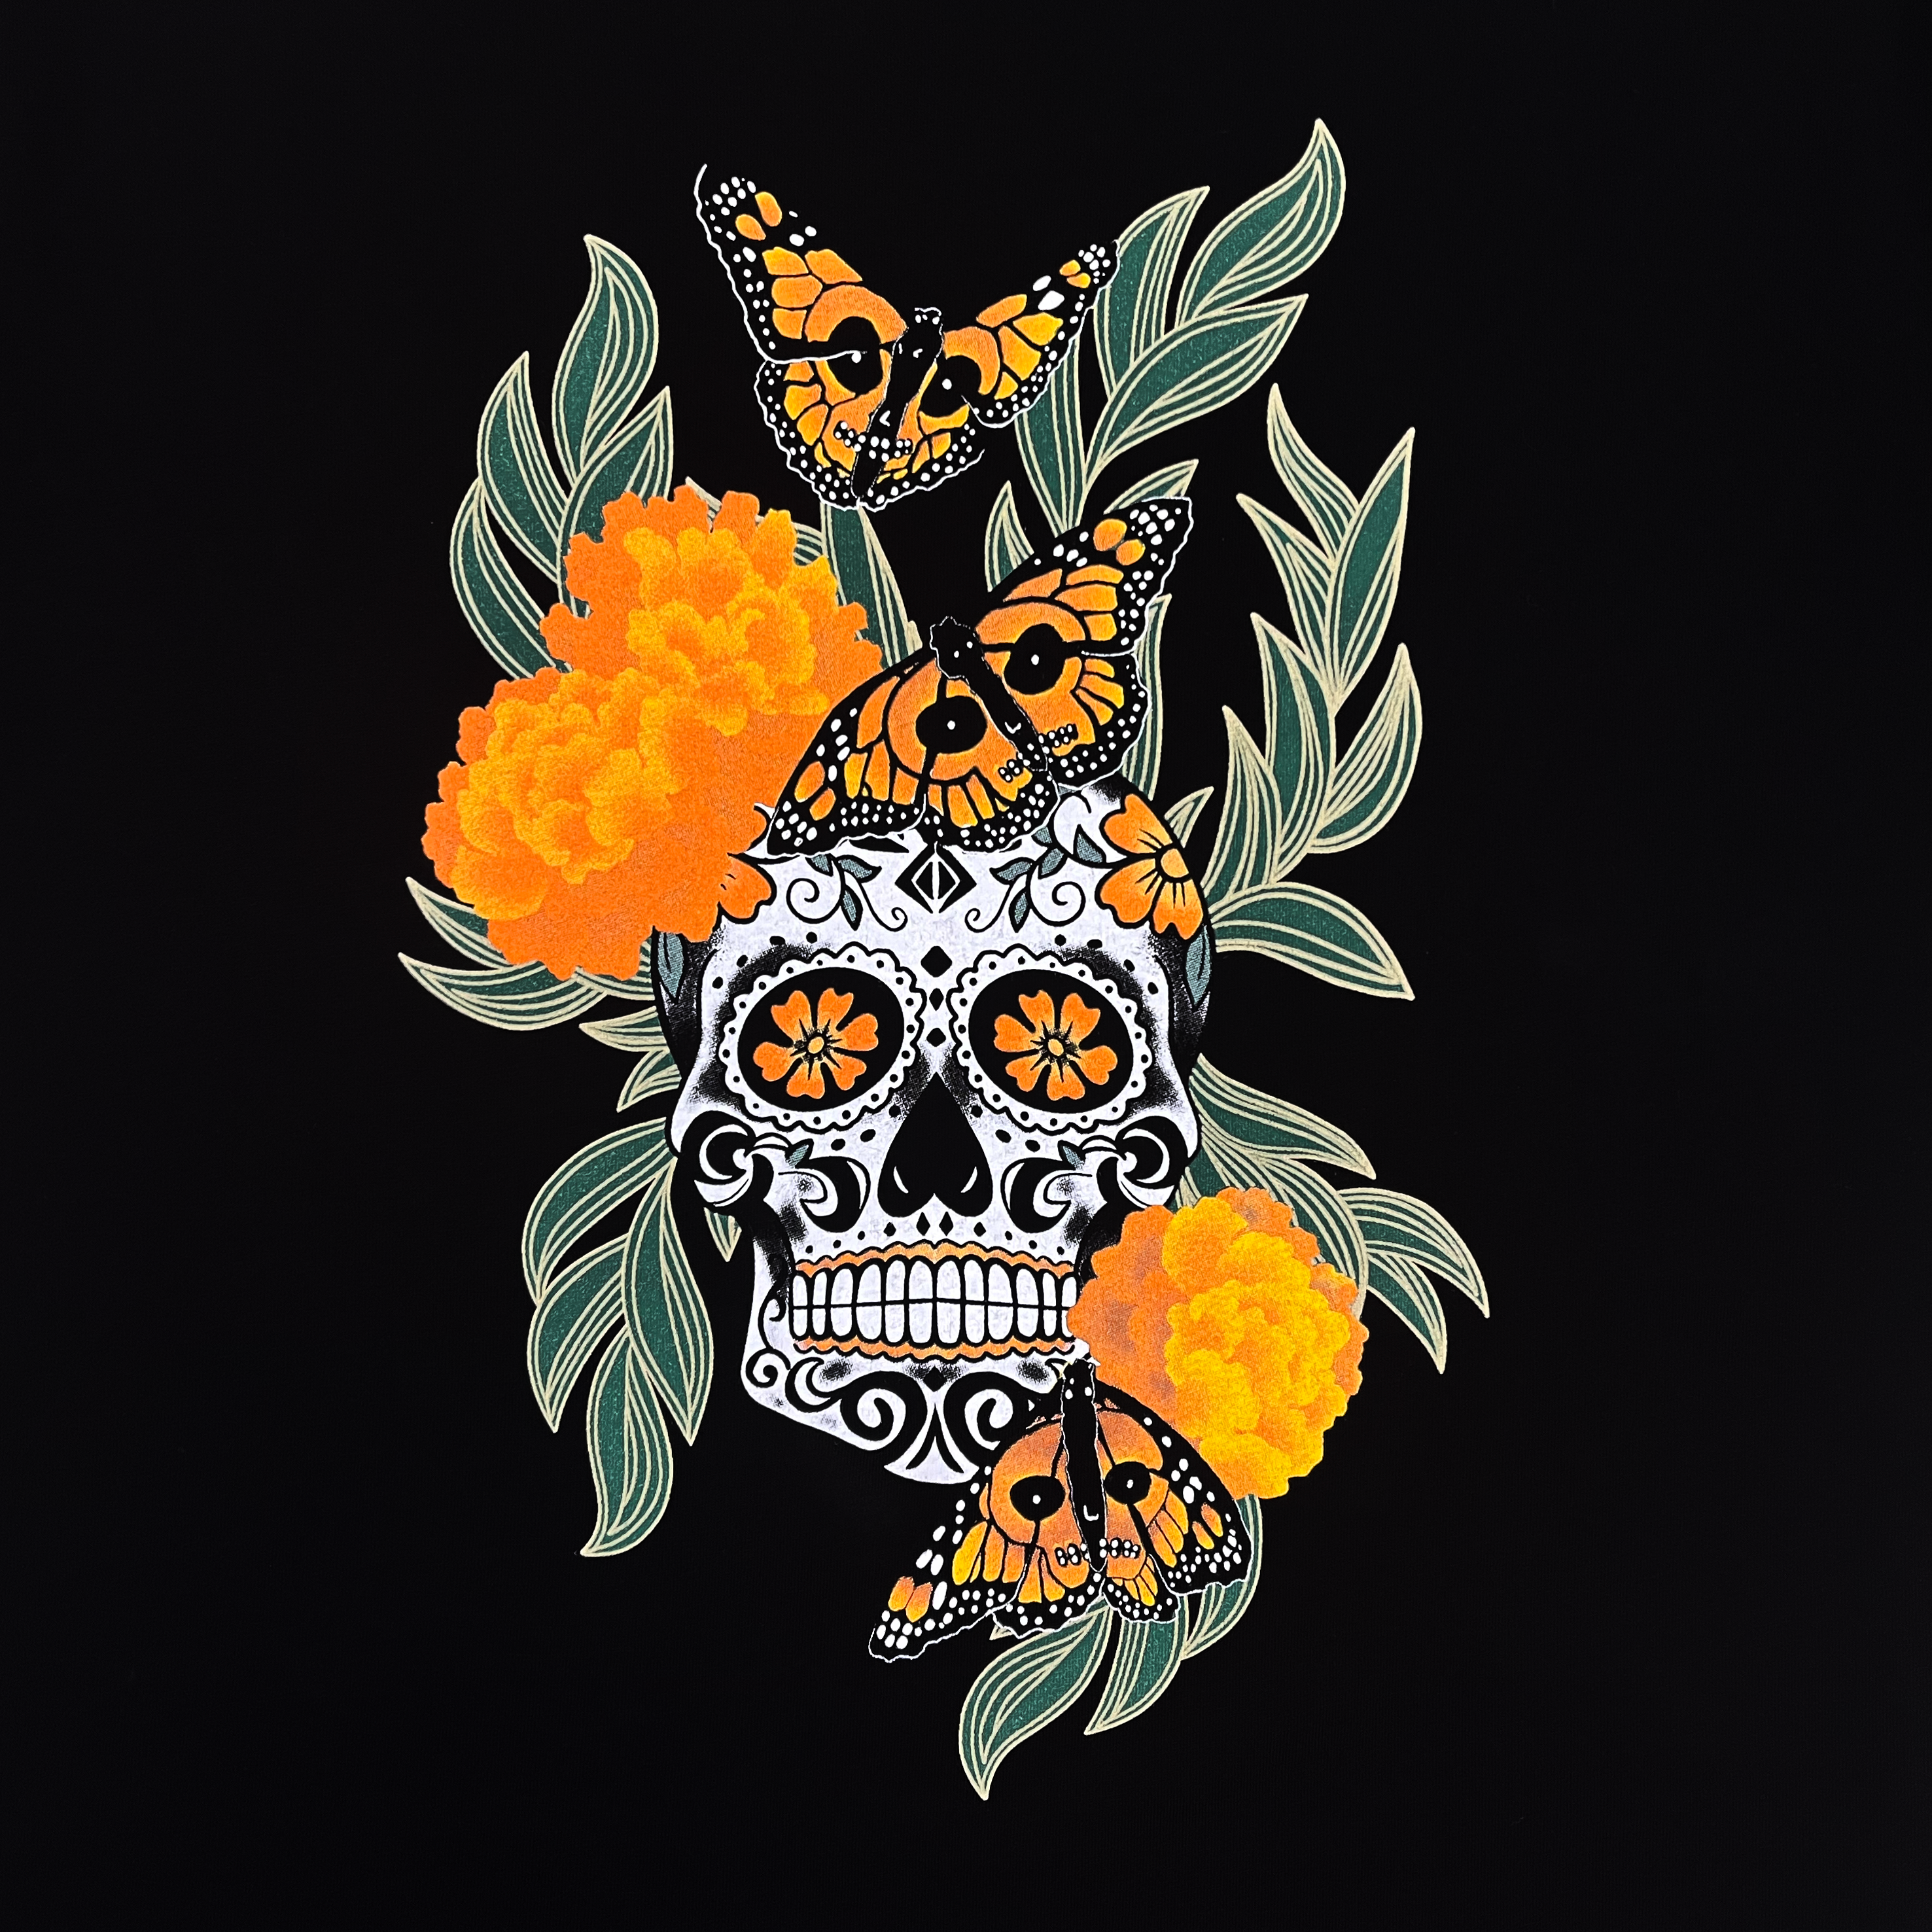 Close-up of graphic art by Oakland artist Jet Martinez depicting a sugar skull surrounded by Marigolds and Monarch butterflies on a black women’s t-shirt.